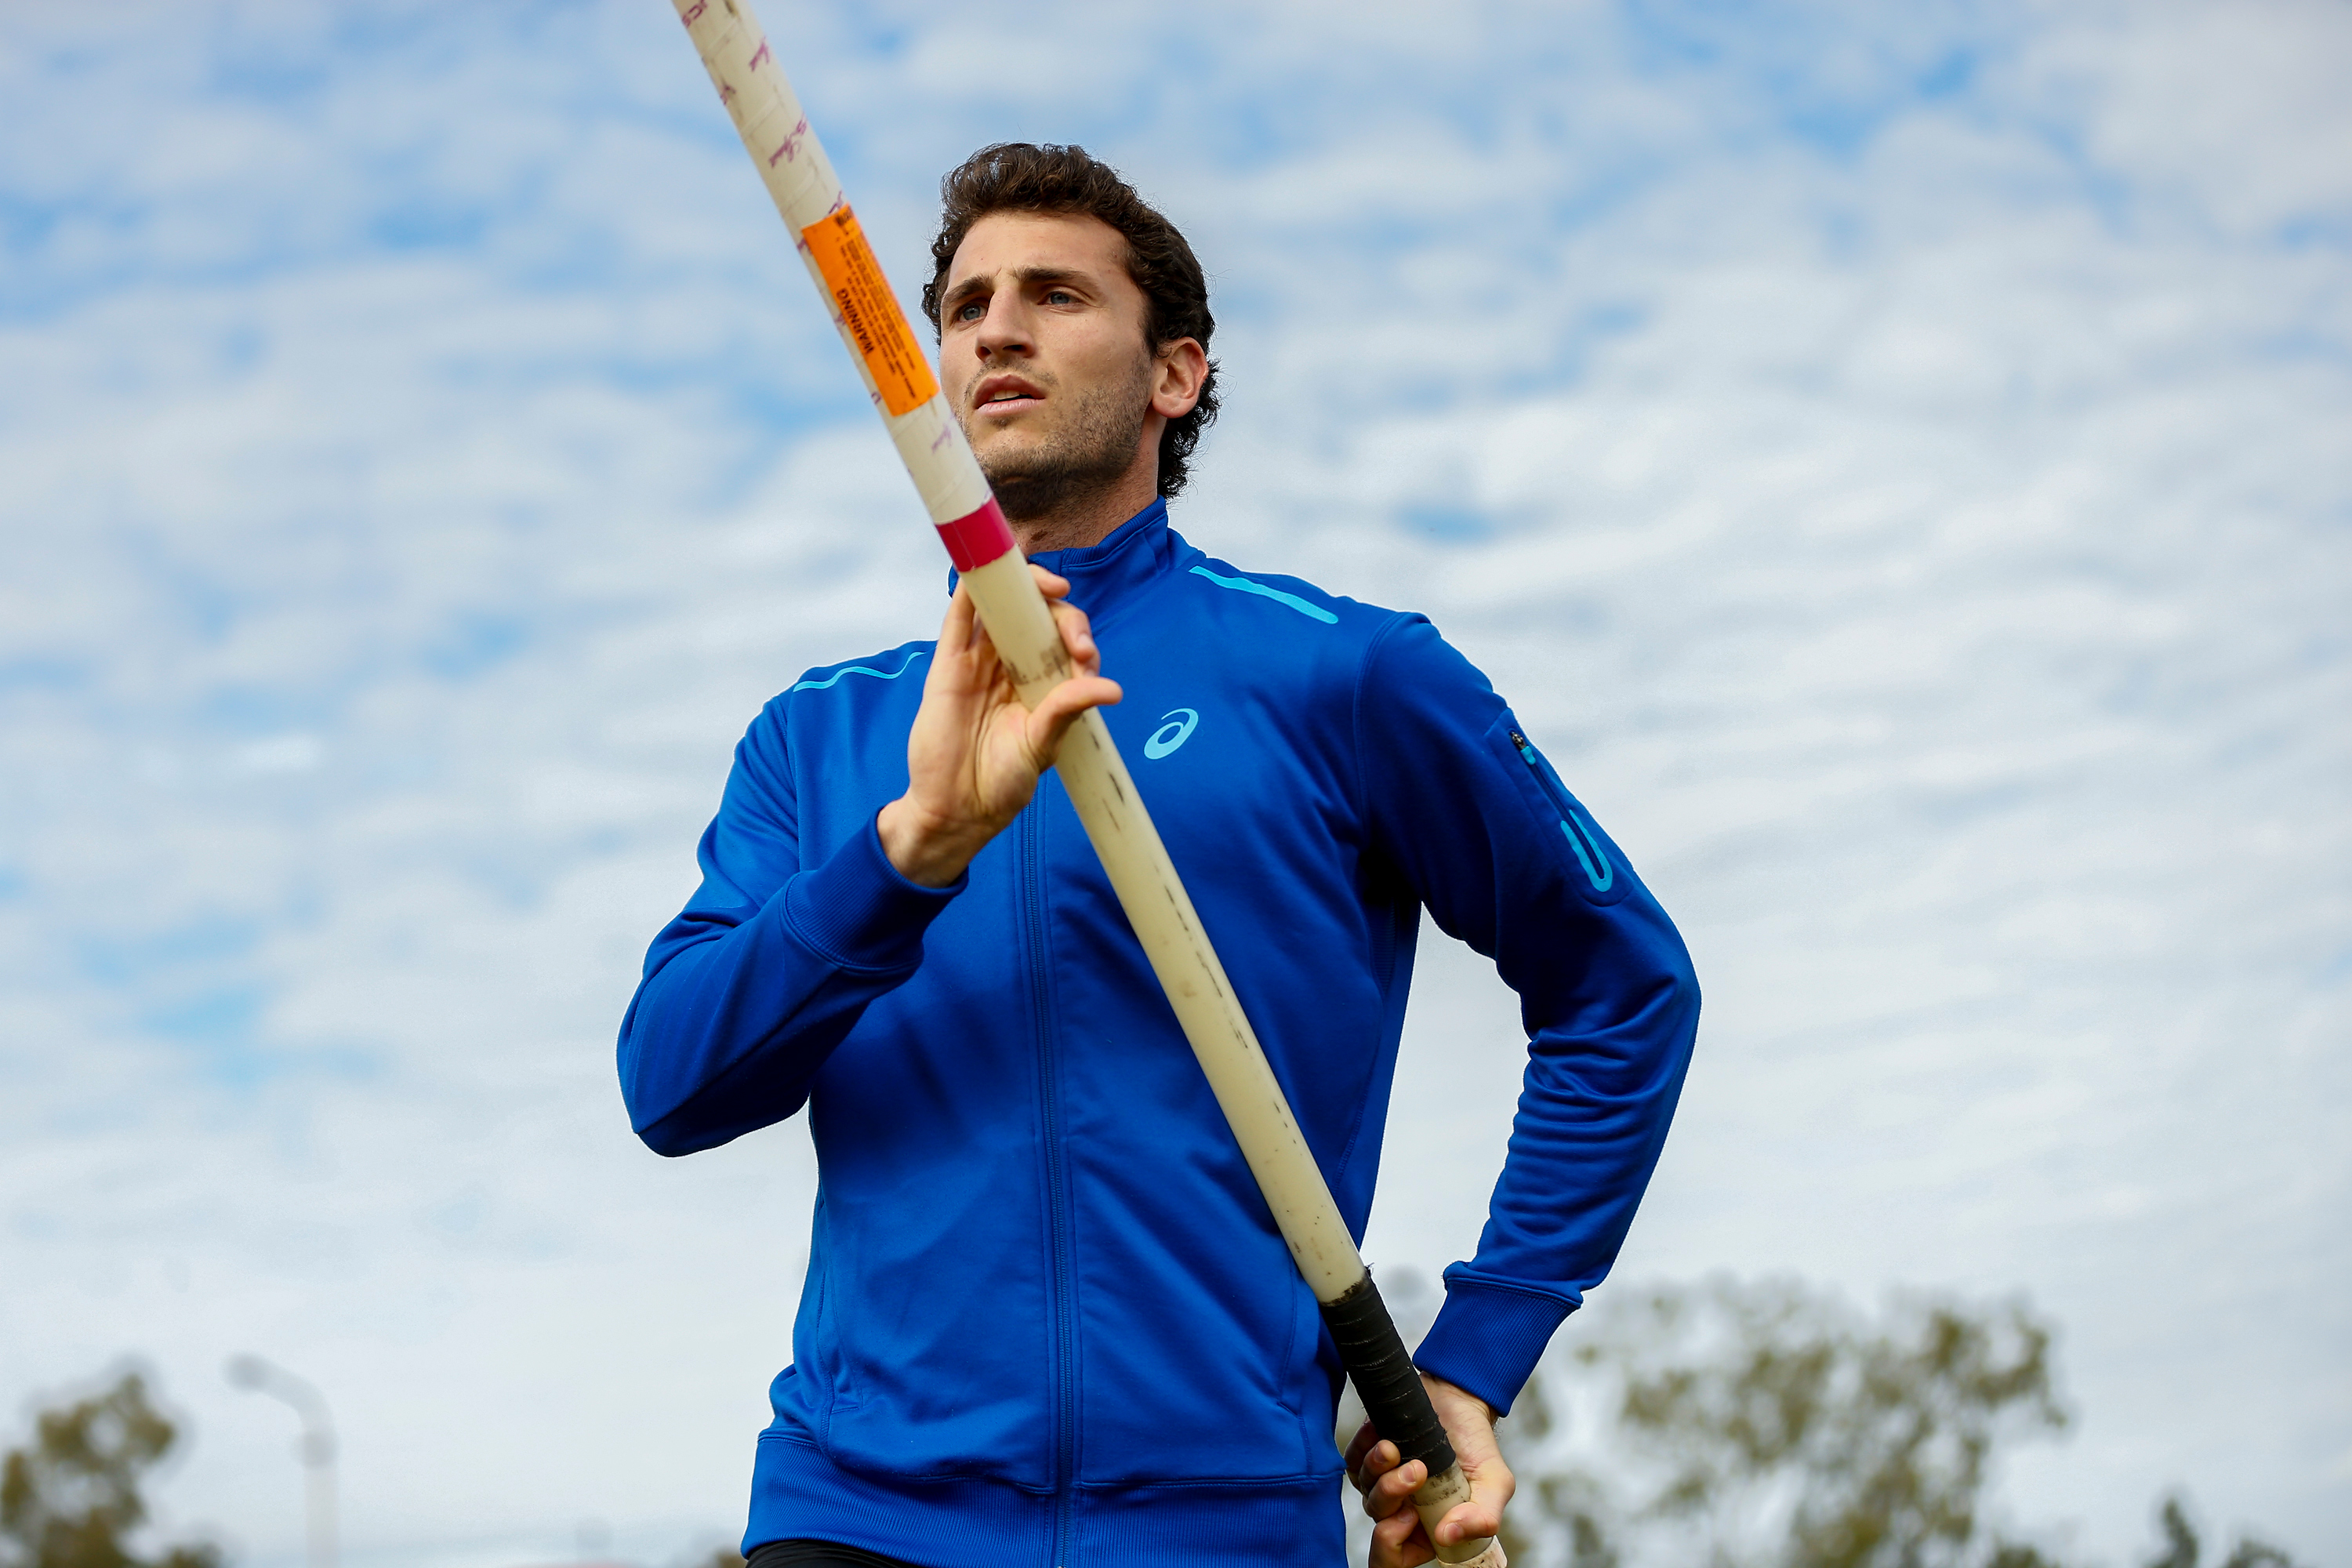 Argentinian pole vaulter Germán Chiaraviglio will not be competing in the Olympics after testing positive for Covid-19. 